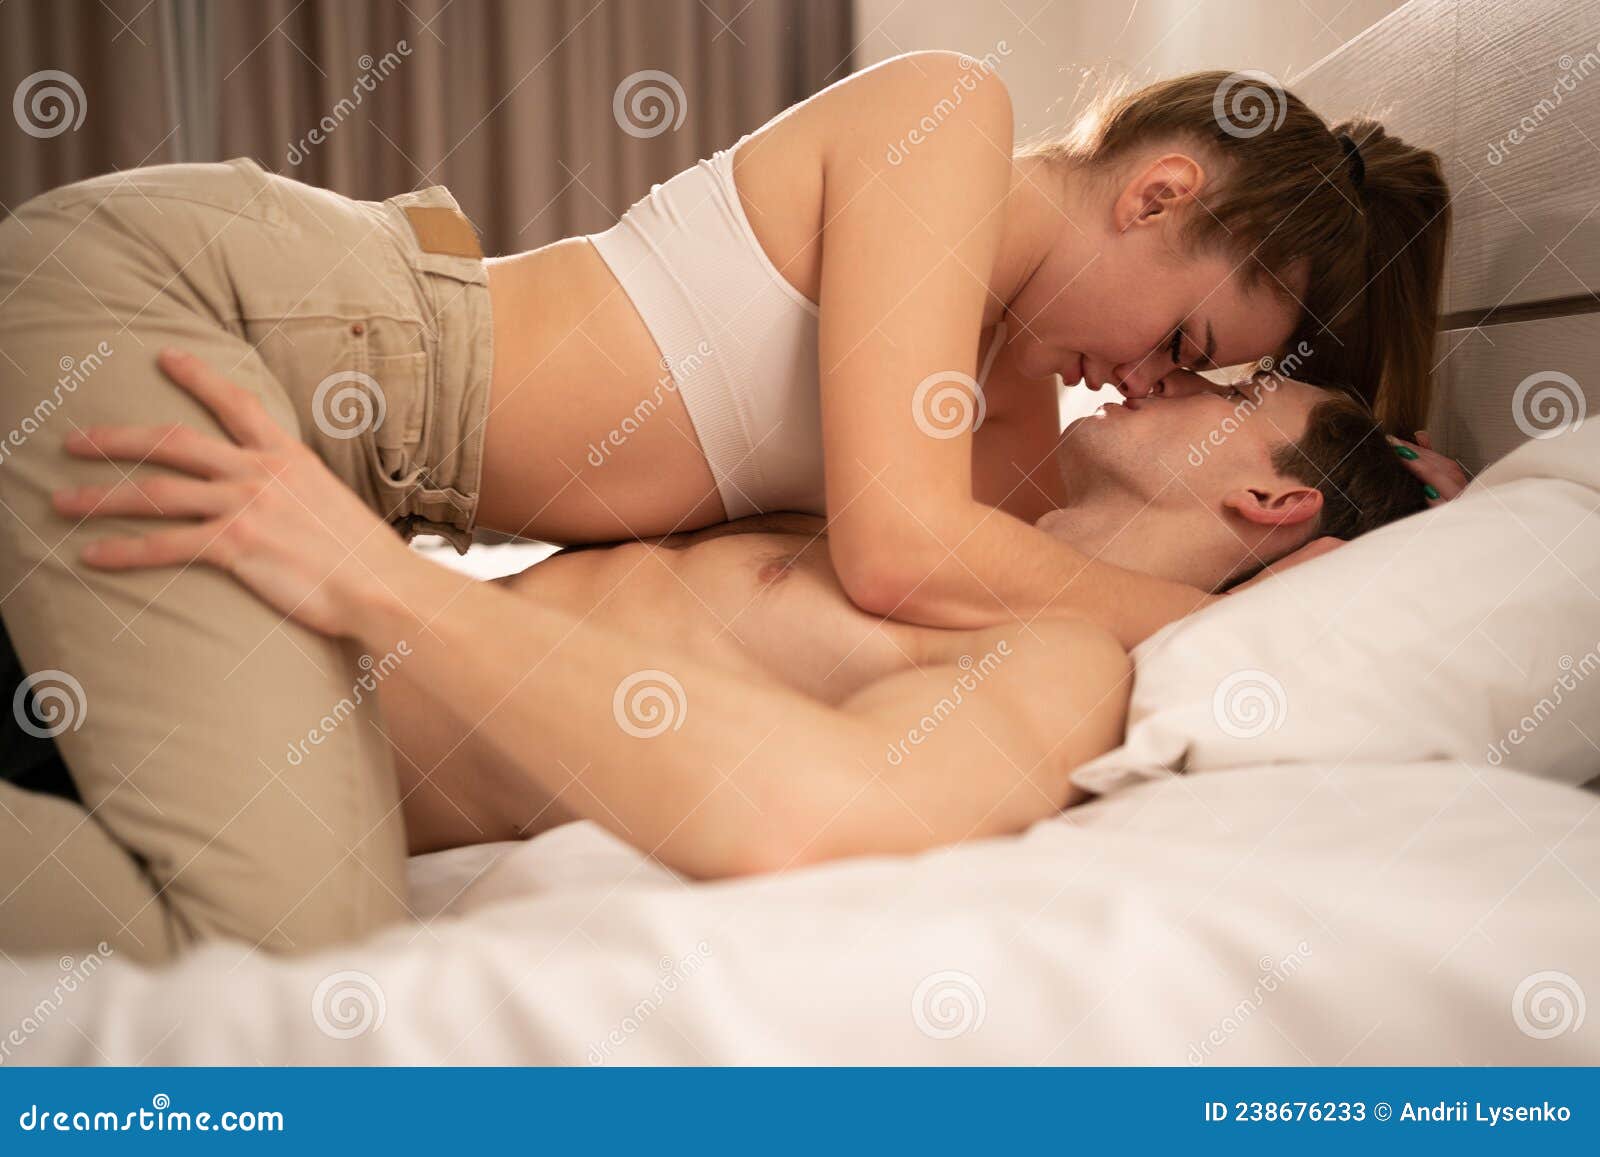 Couple in Bed Makes Love, Woman Kissing a Man Sitting on Top, Lovers  Foreplay of Love, Intimate Meeting in the Bedroom Stock Image - Image of  foreplay, erotic: 238676233